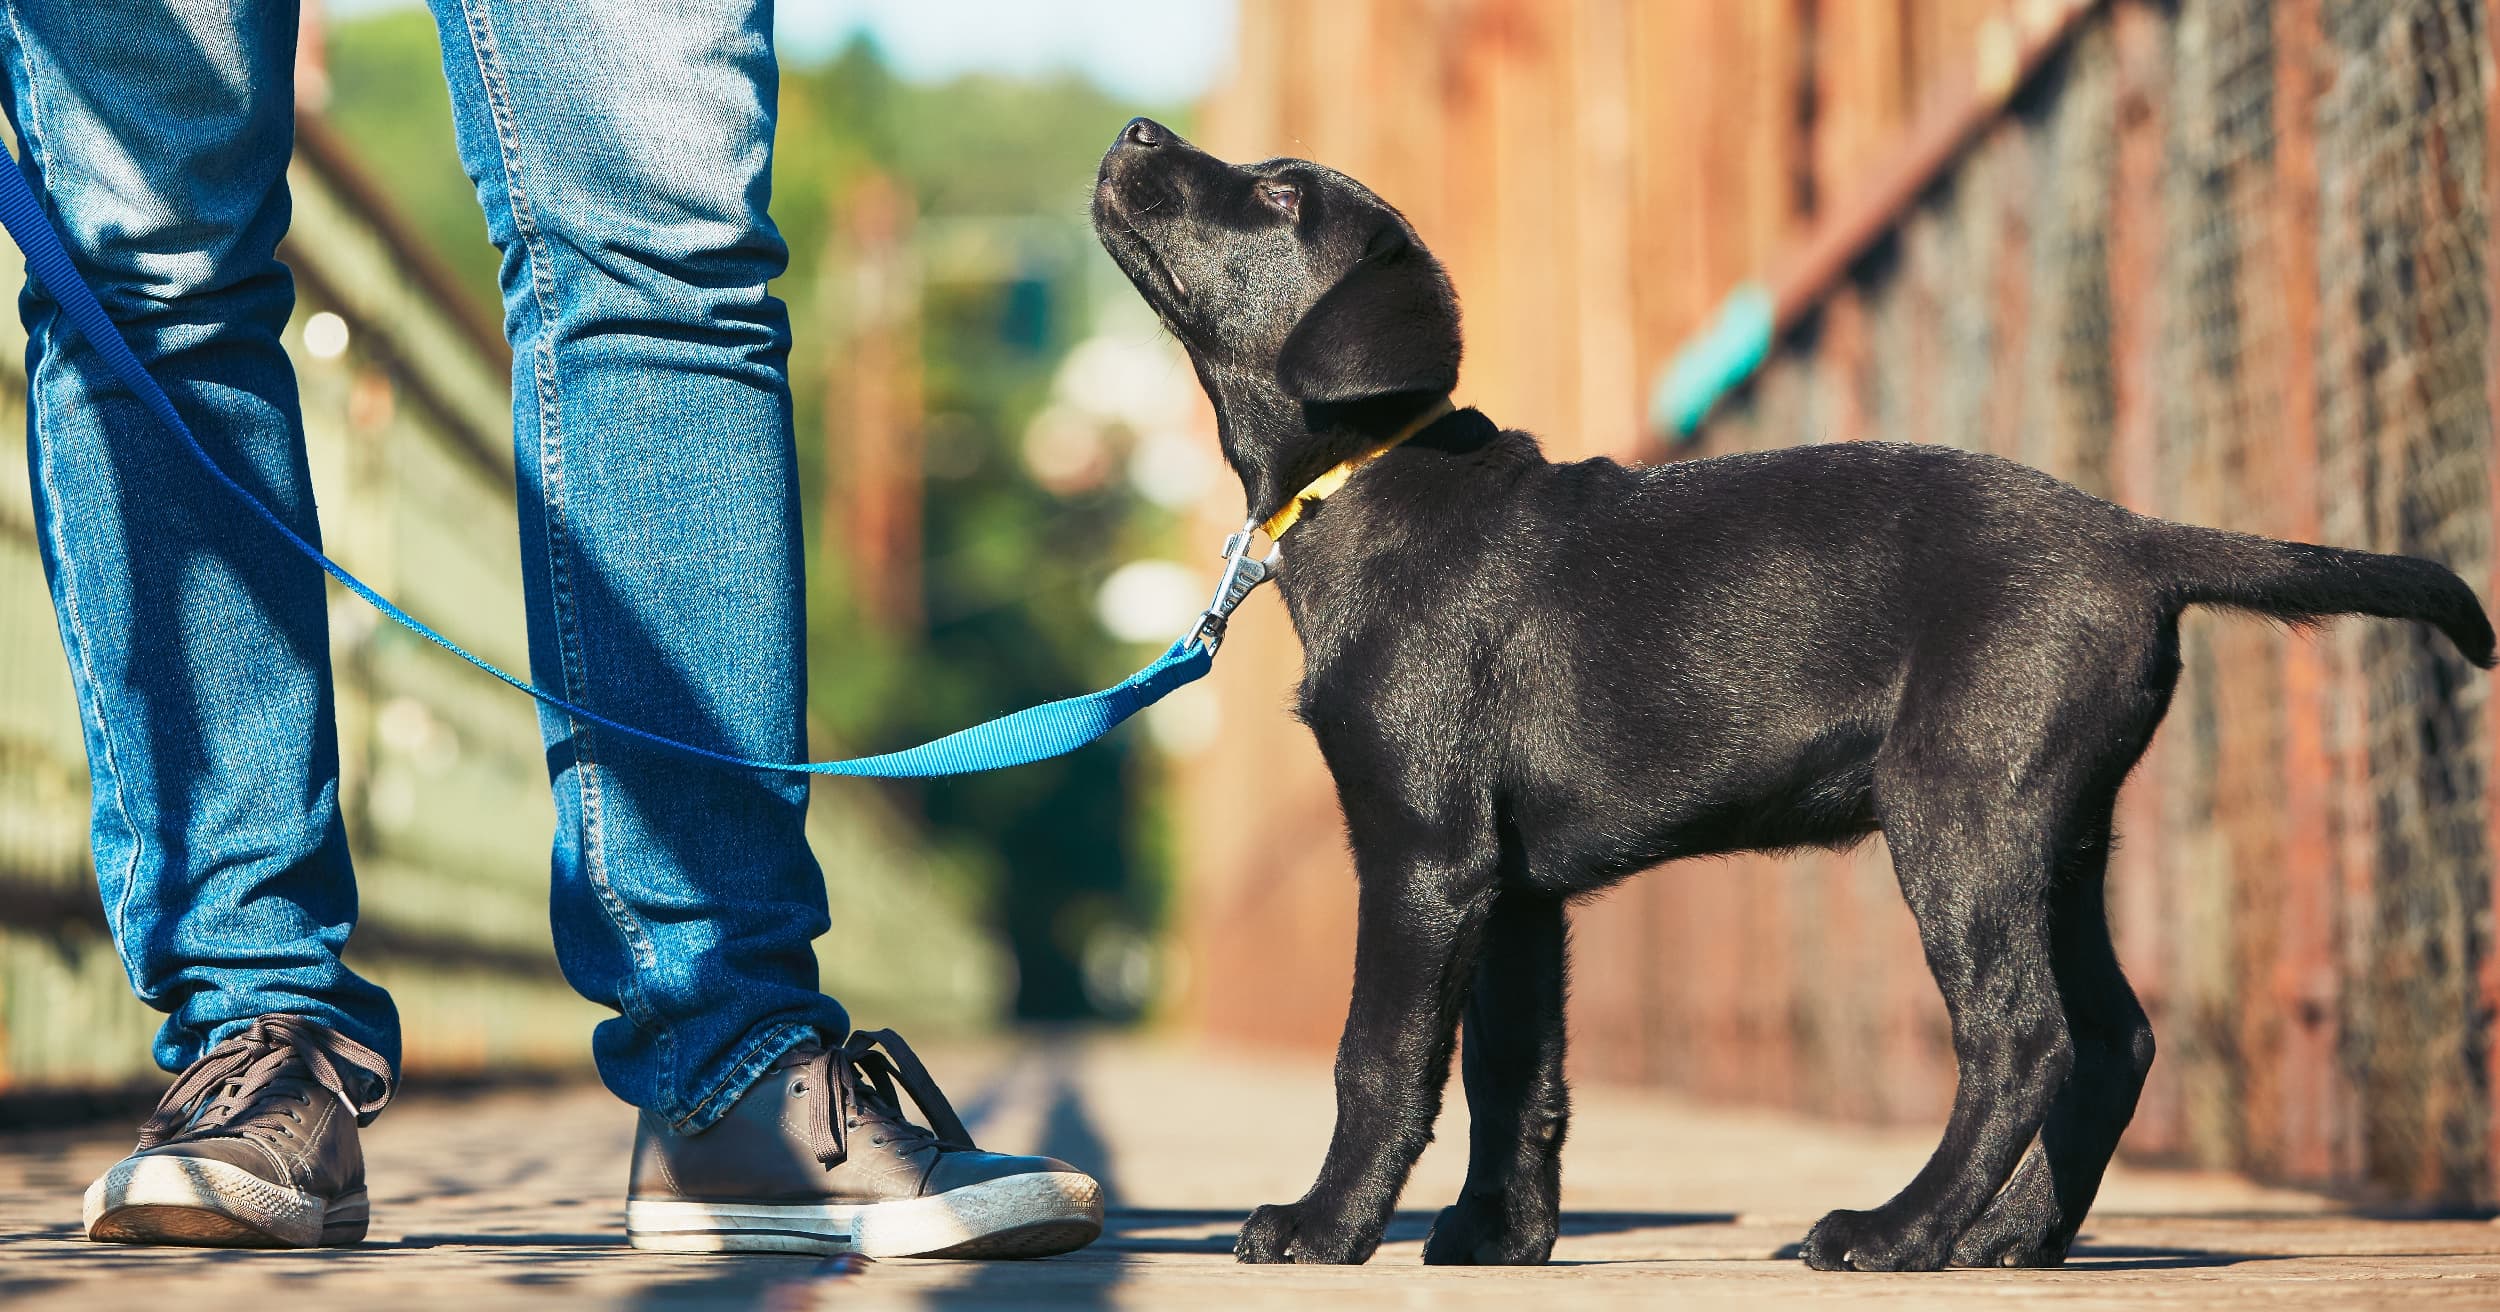 A black puppy on a leash standing next to its owner outside.